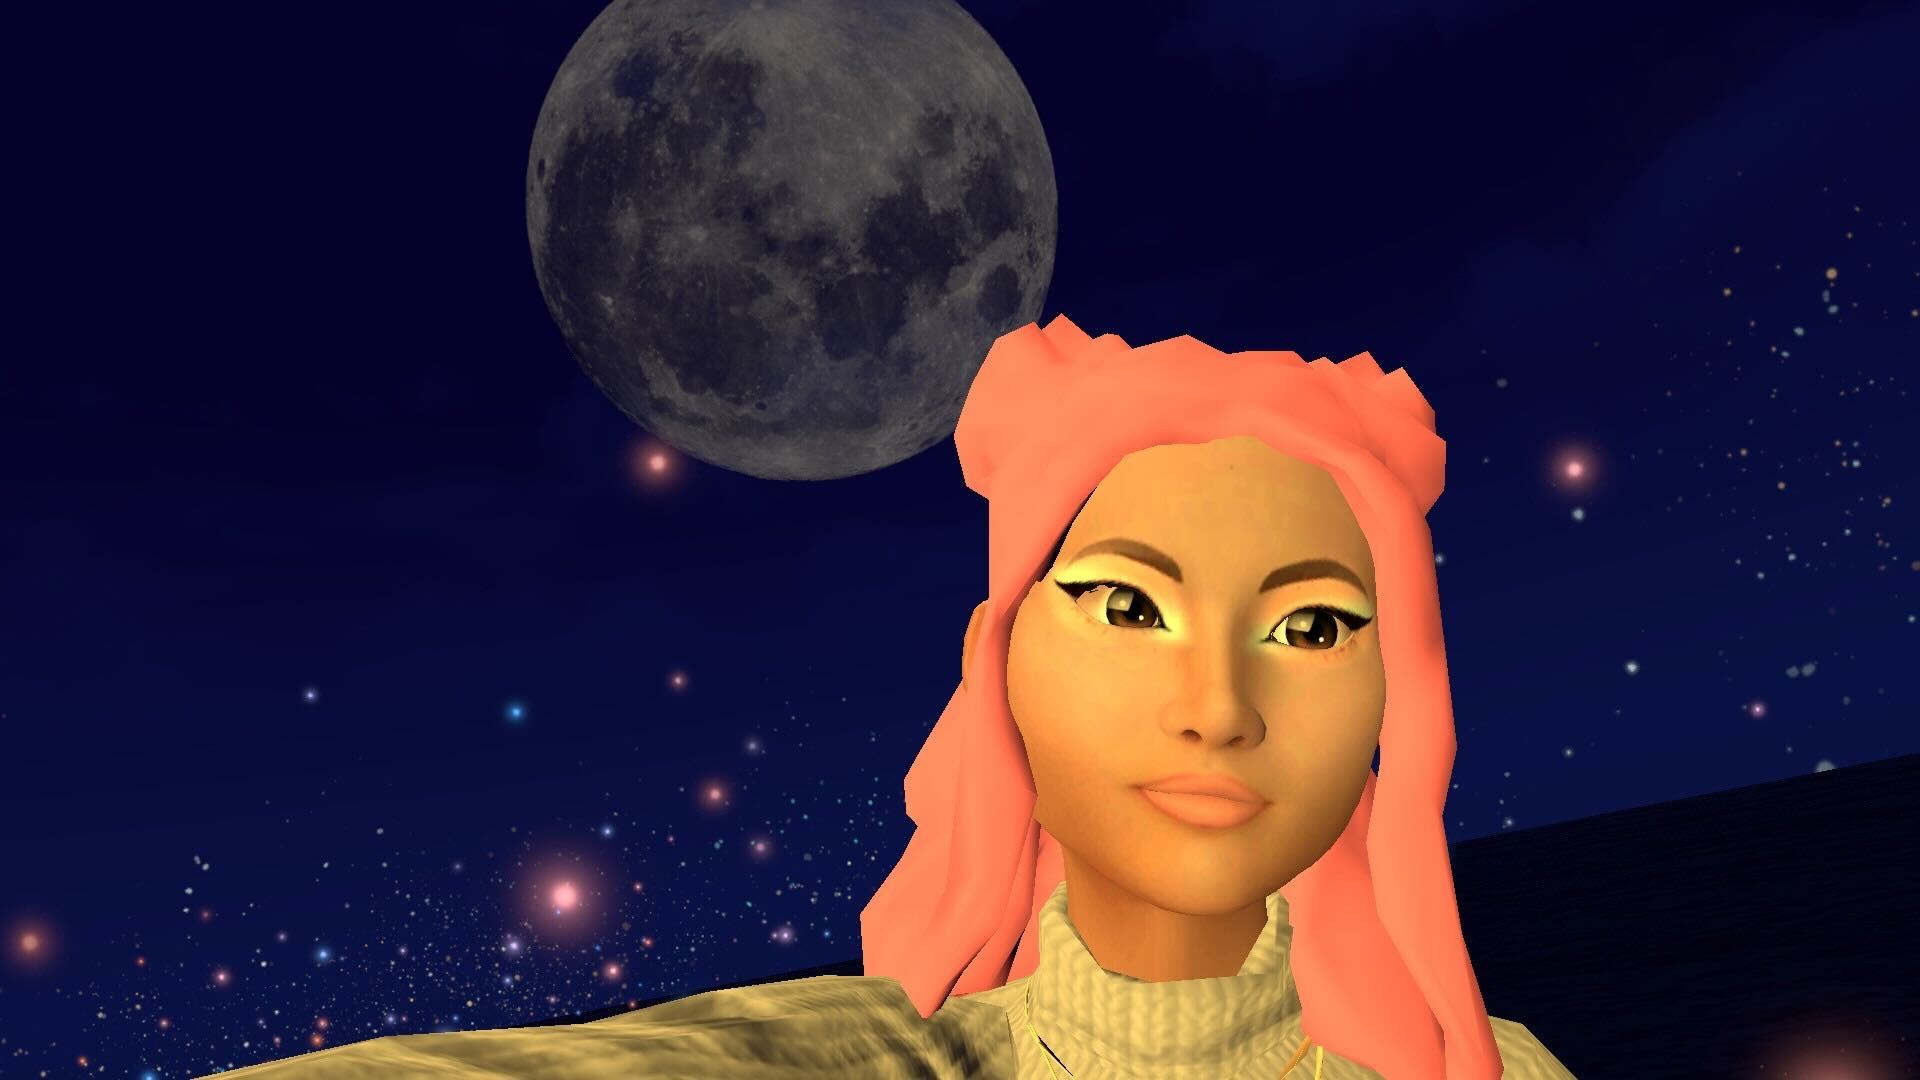 Virtual reality image of a woman with pink hair in space with the moon behind her.